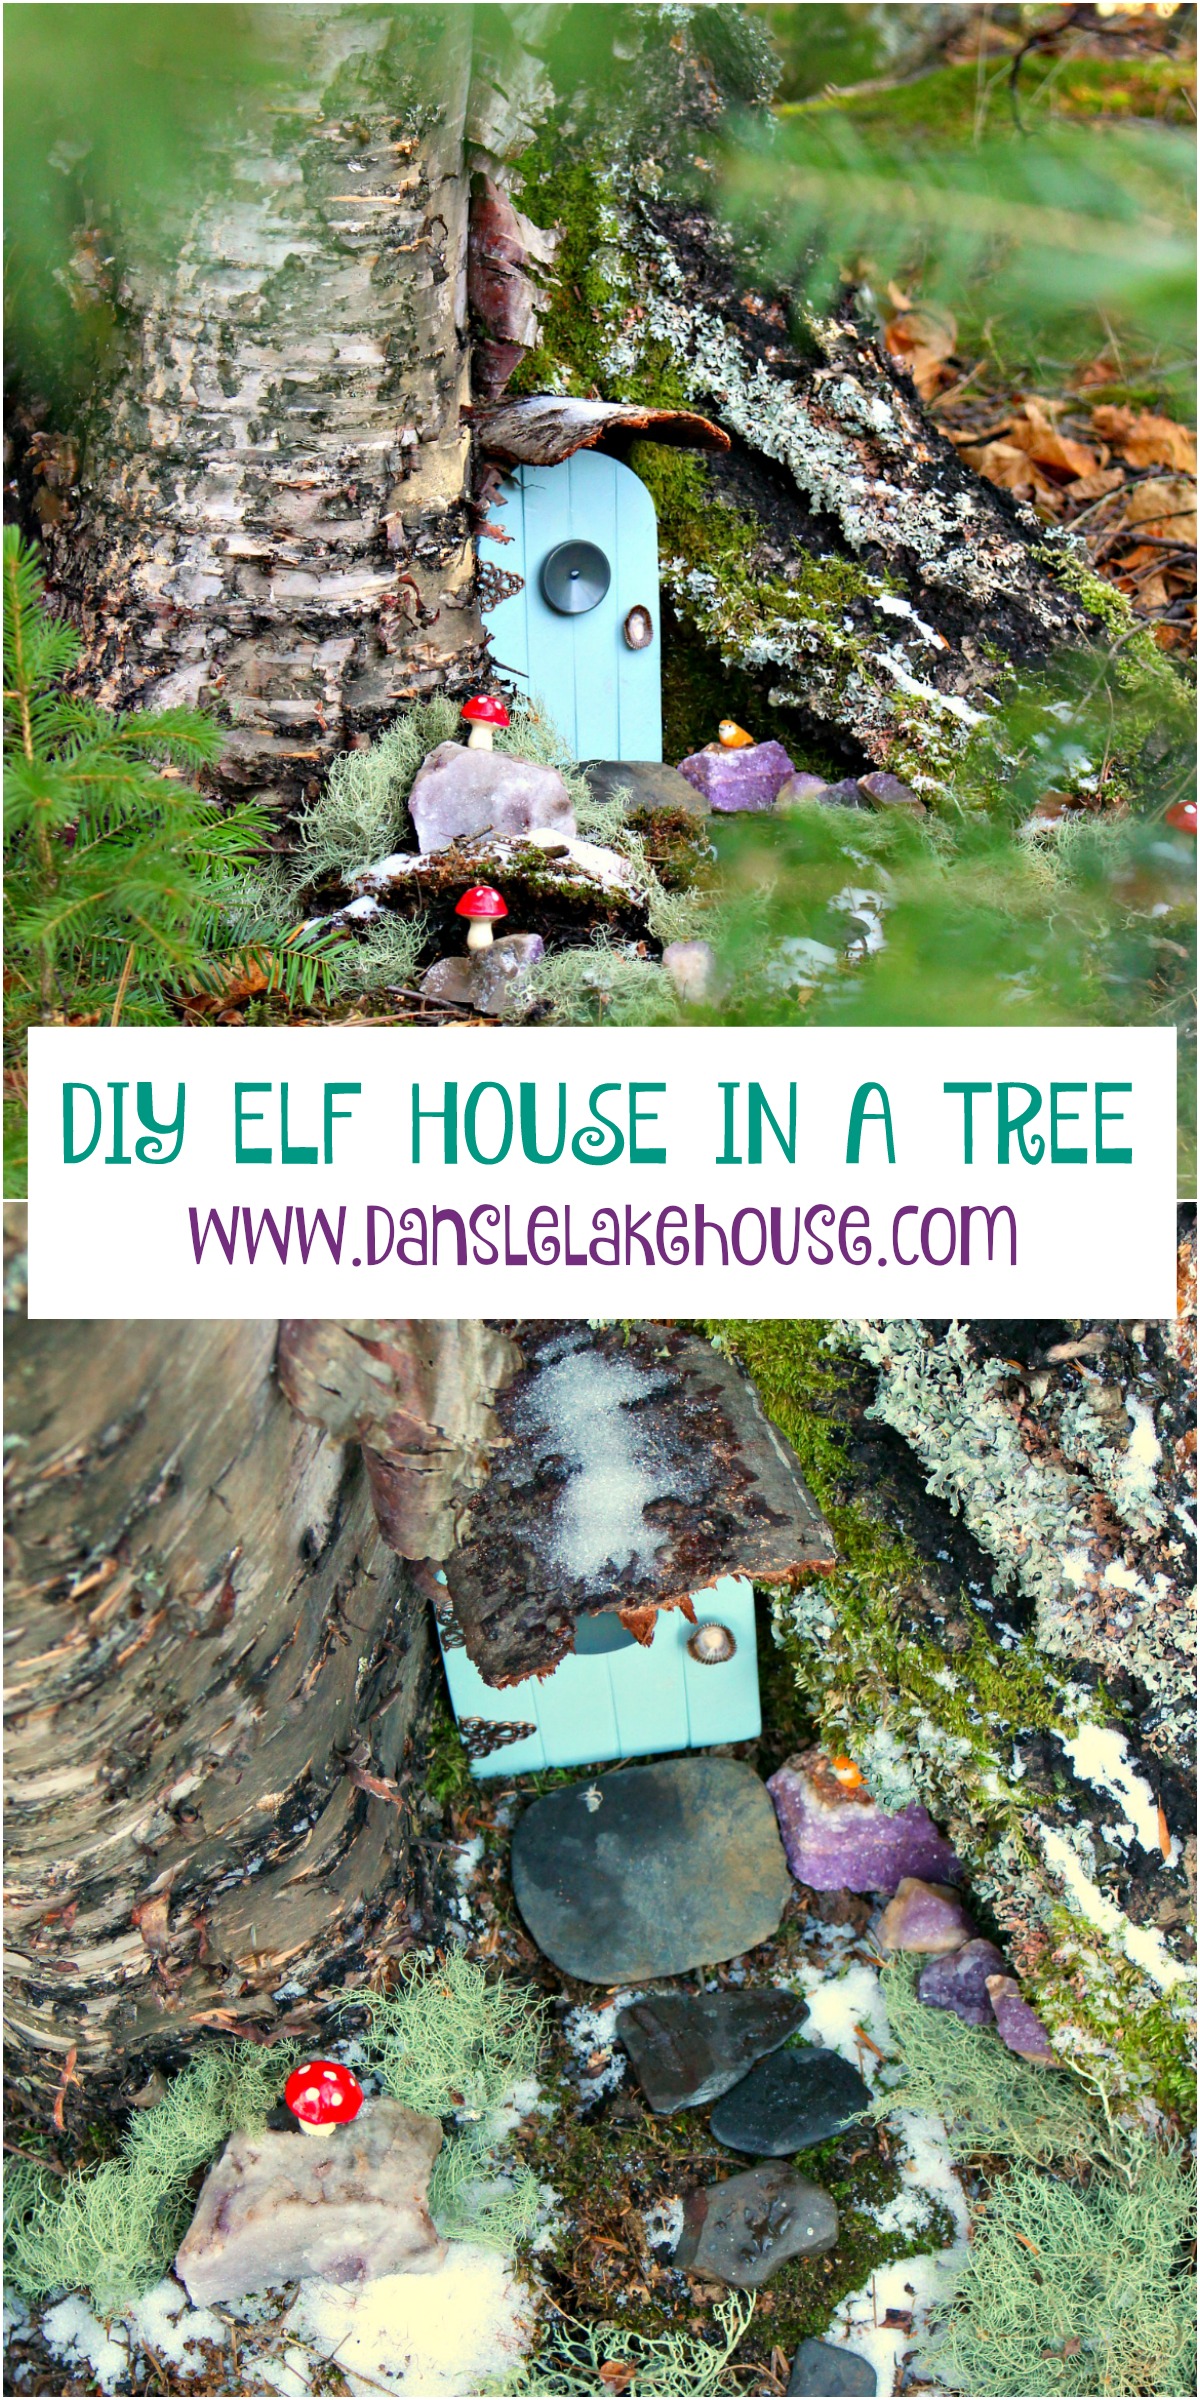 DIY Elf House in a Tree Project